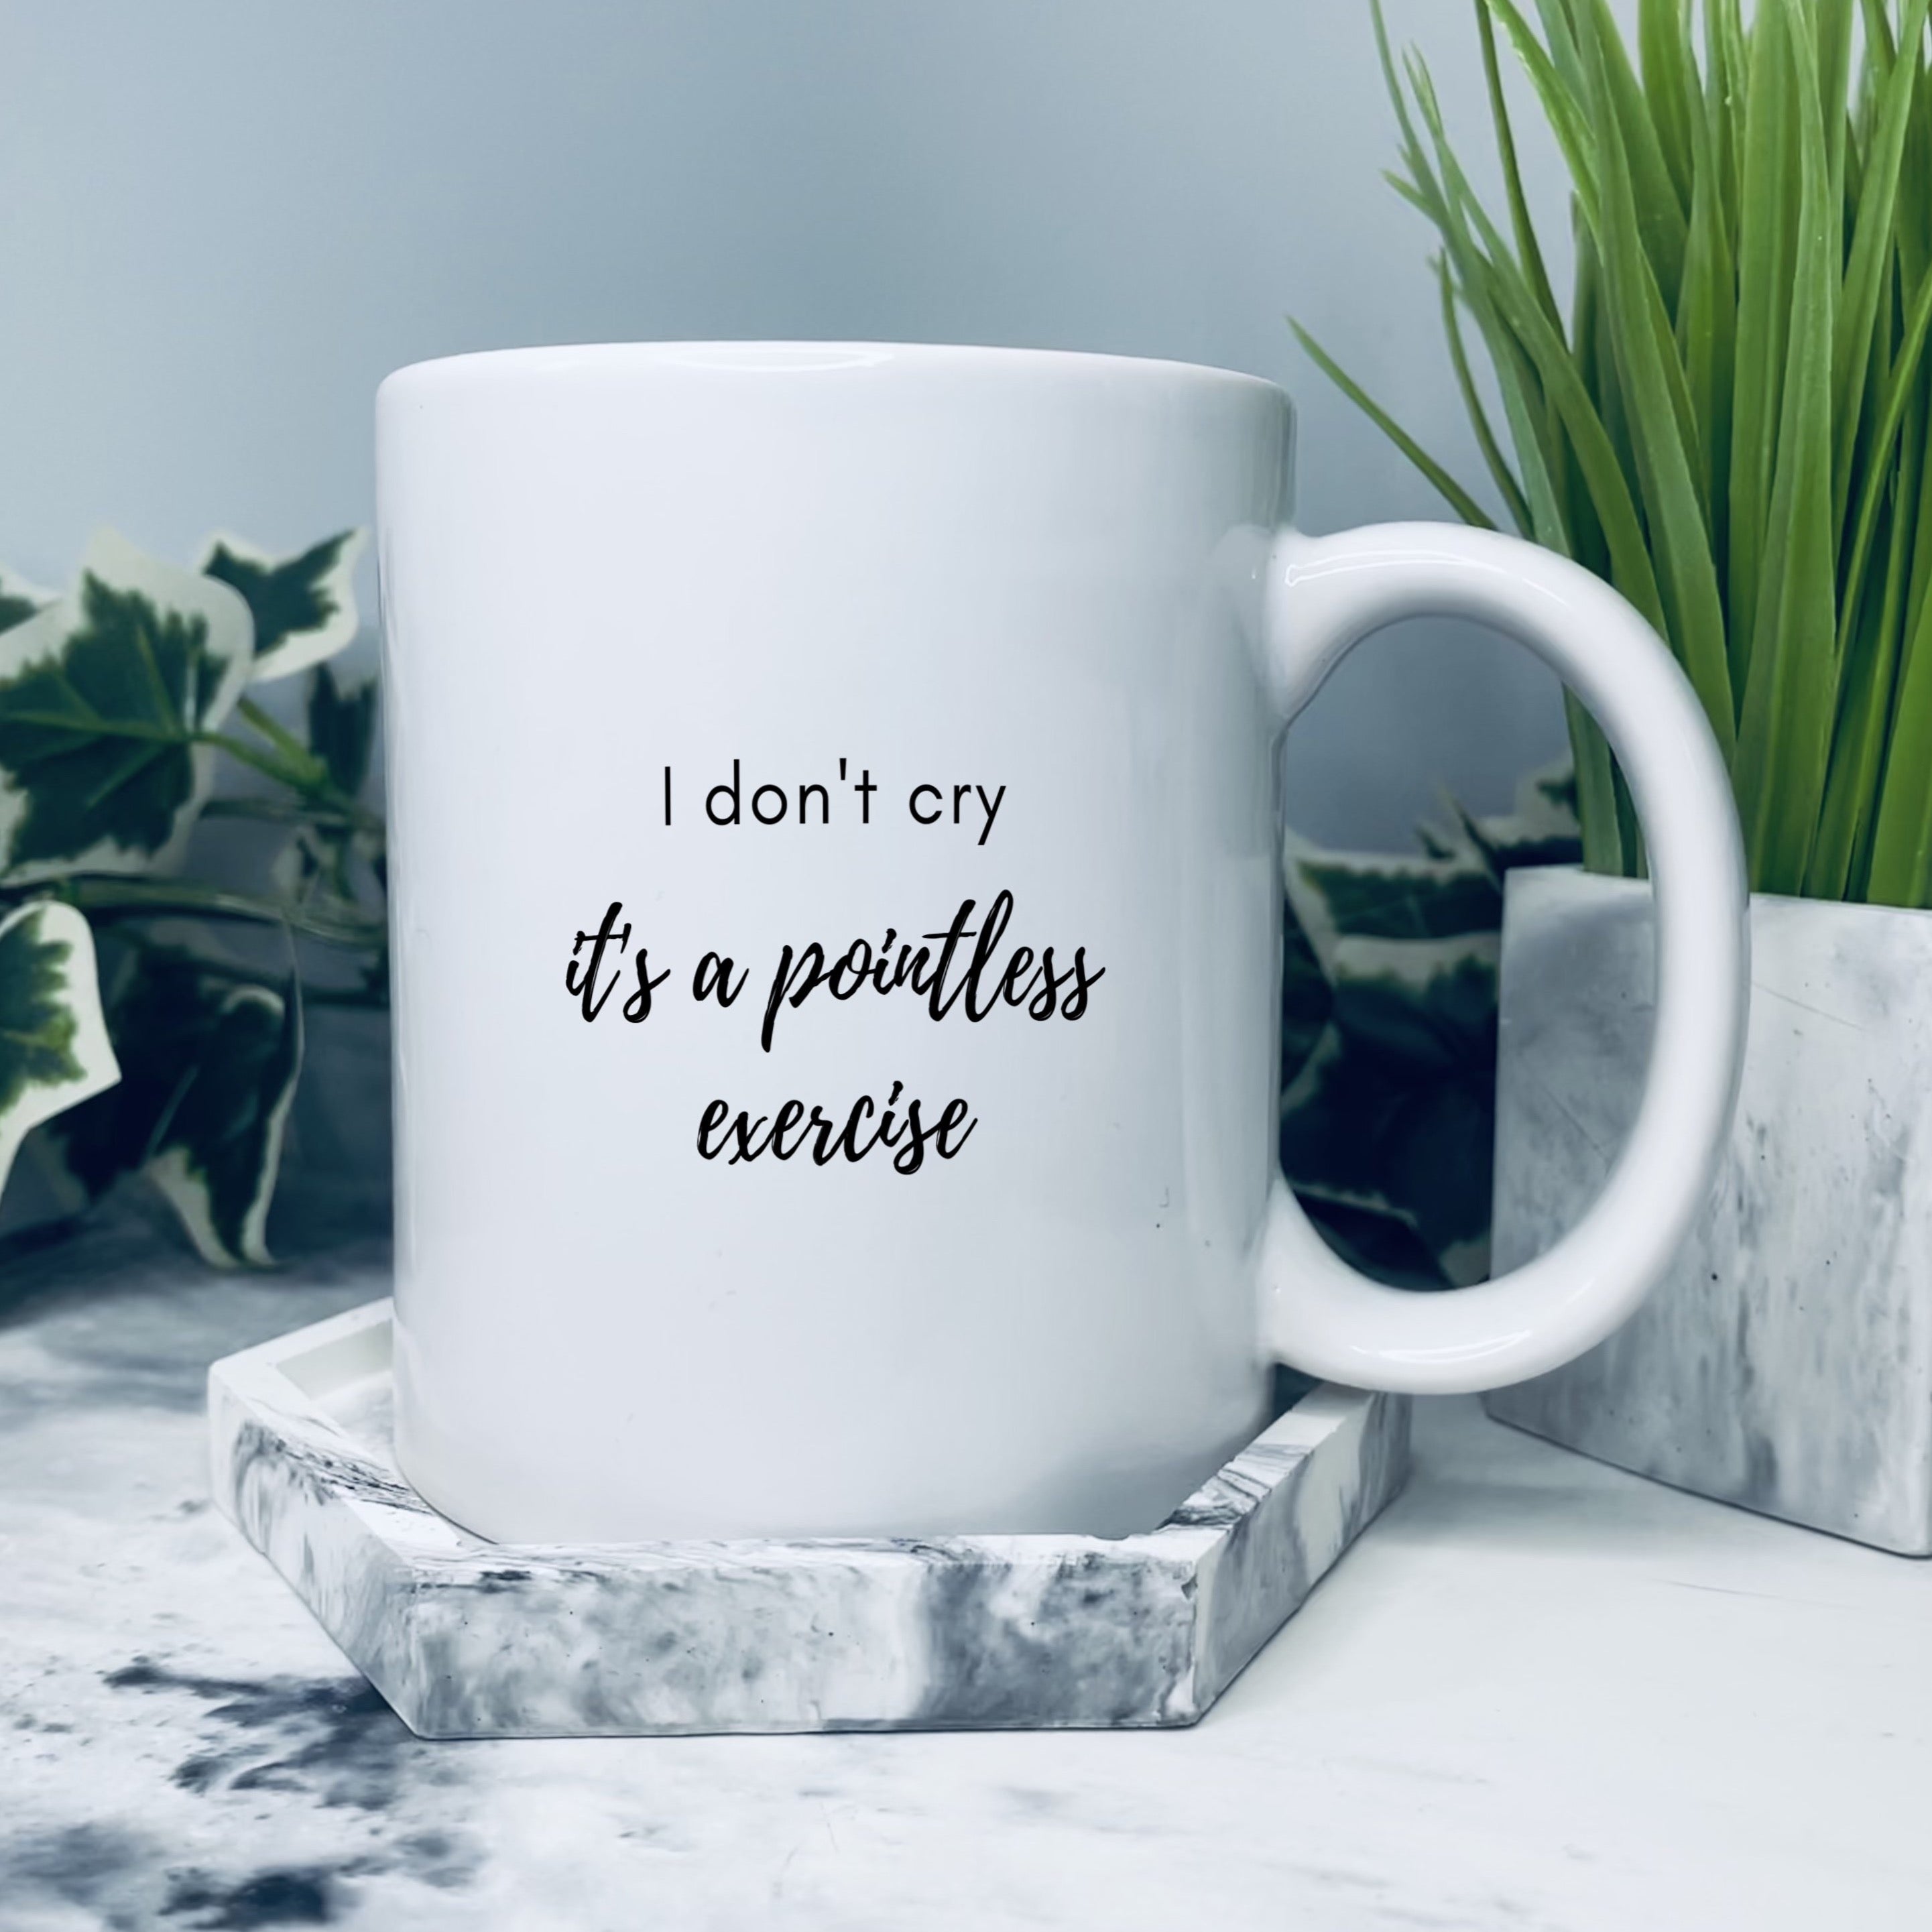 Mug that says: I don't cry it's a pointless exercise